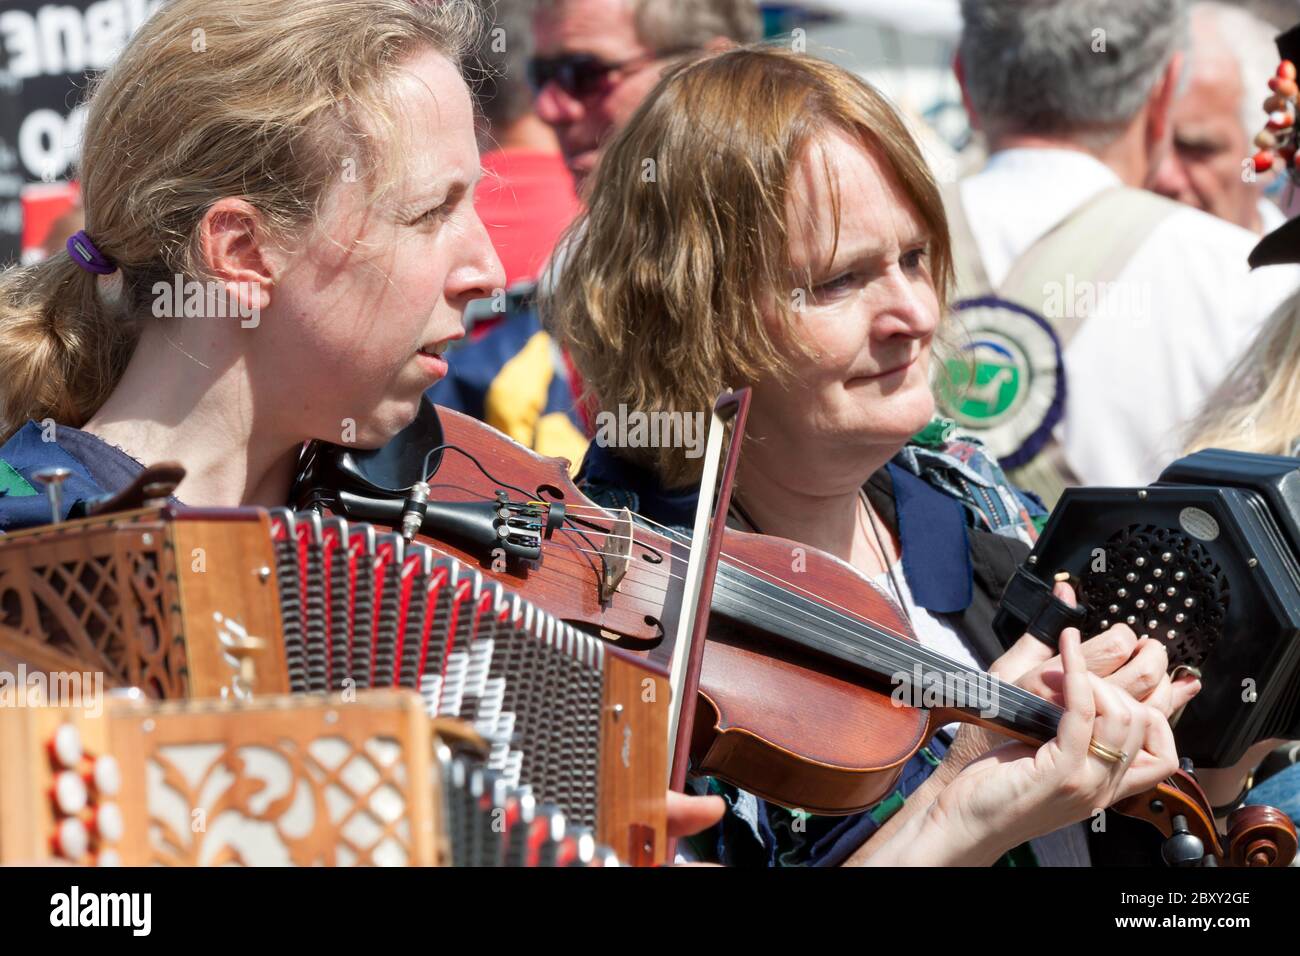 Women playing violin and accordion at a folk music festival in Weymouth, Dorset. Stock Photo